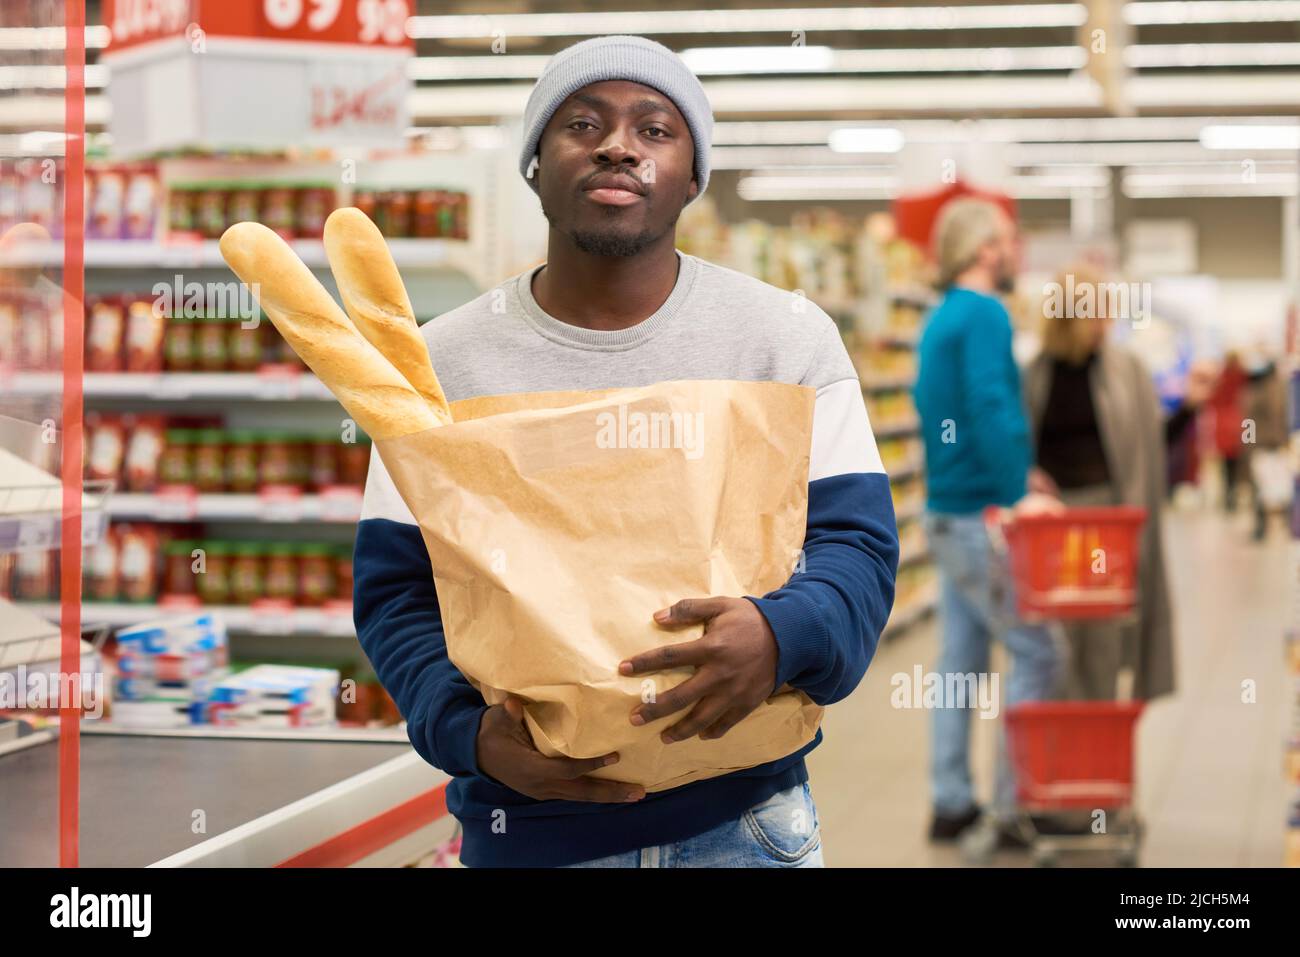 Young African American male buyer carrying paper sack with two fresh wheat baguettes and looking at camera against other customers Stock Photo